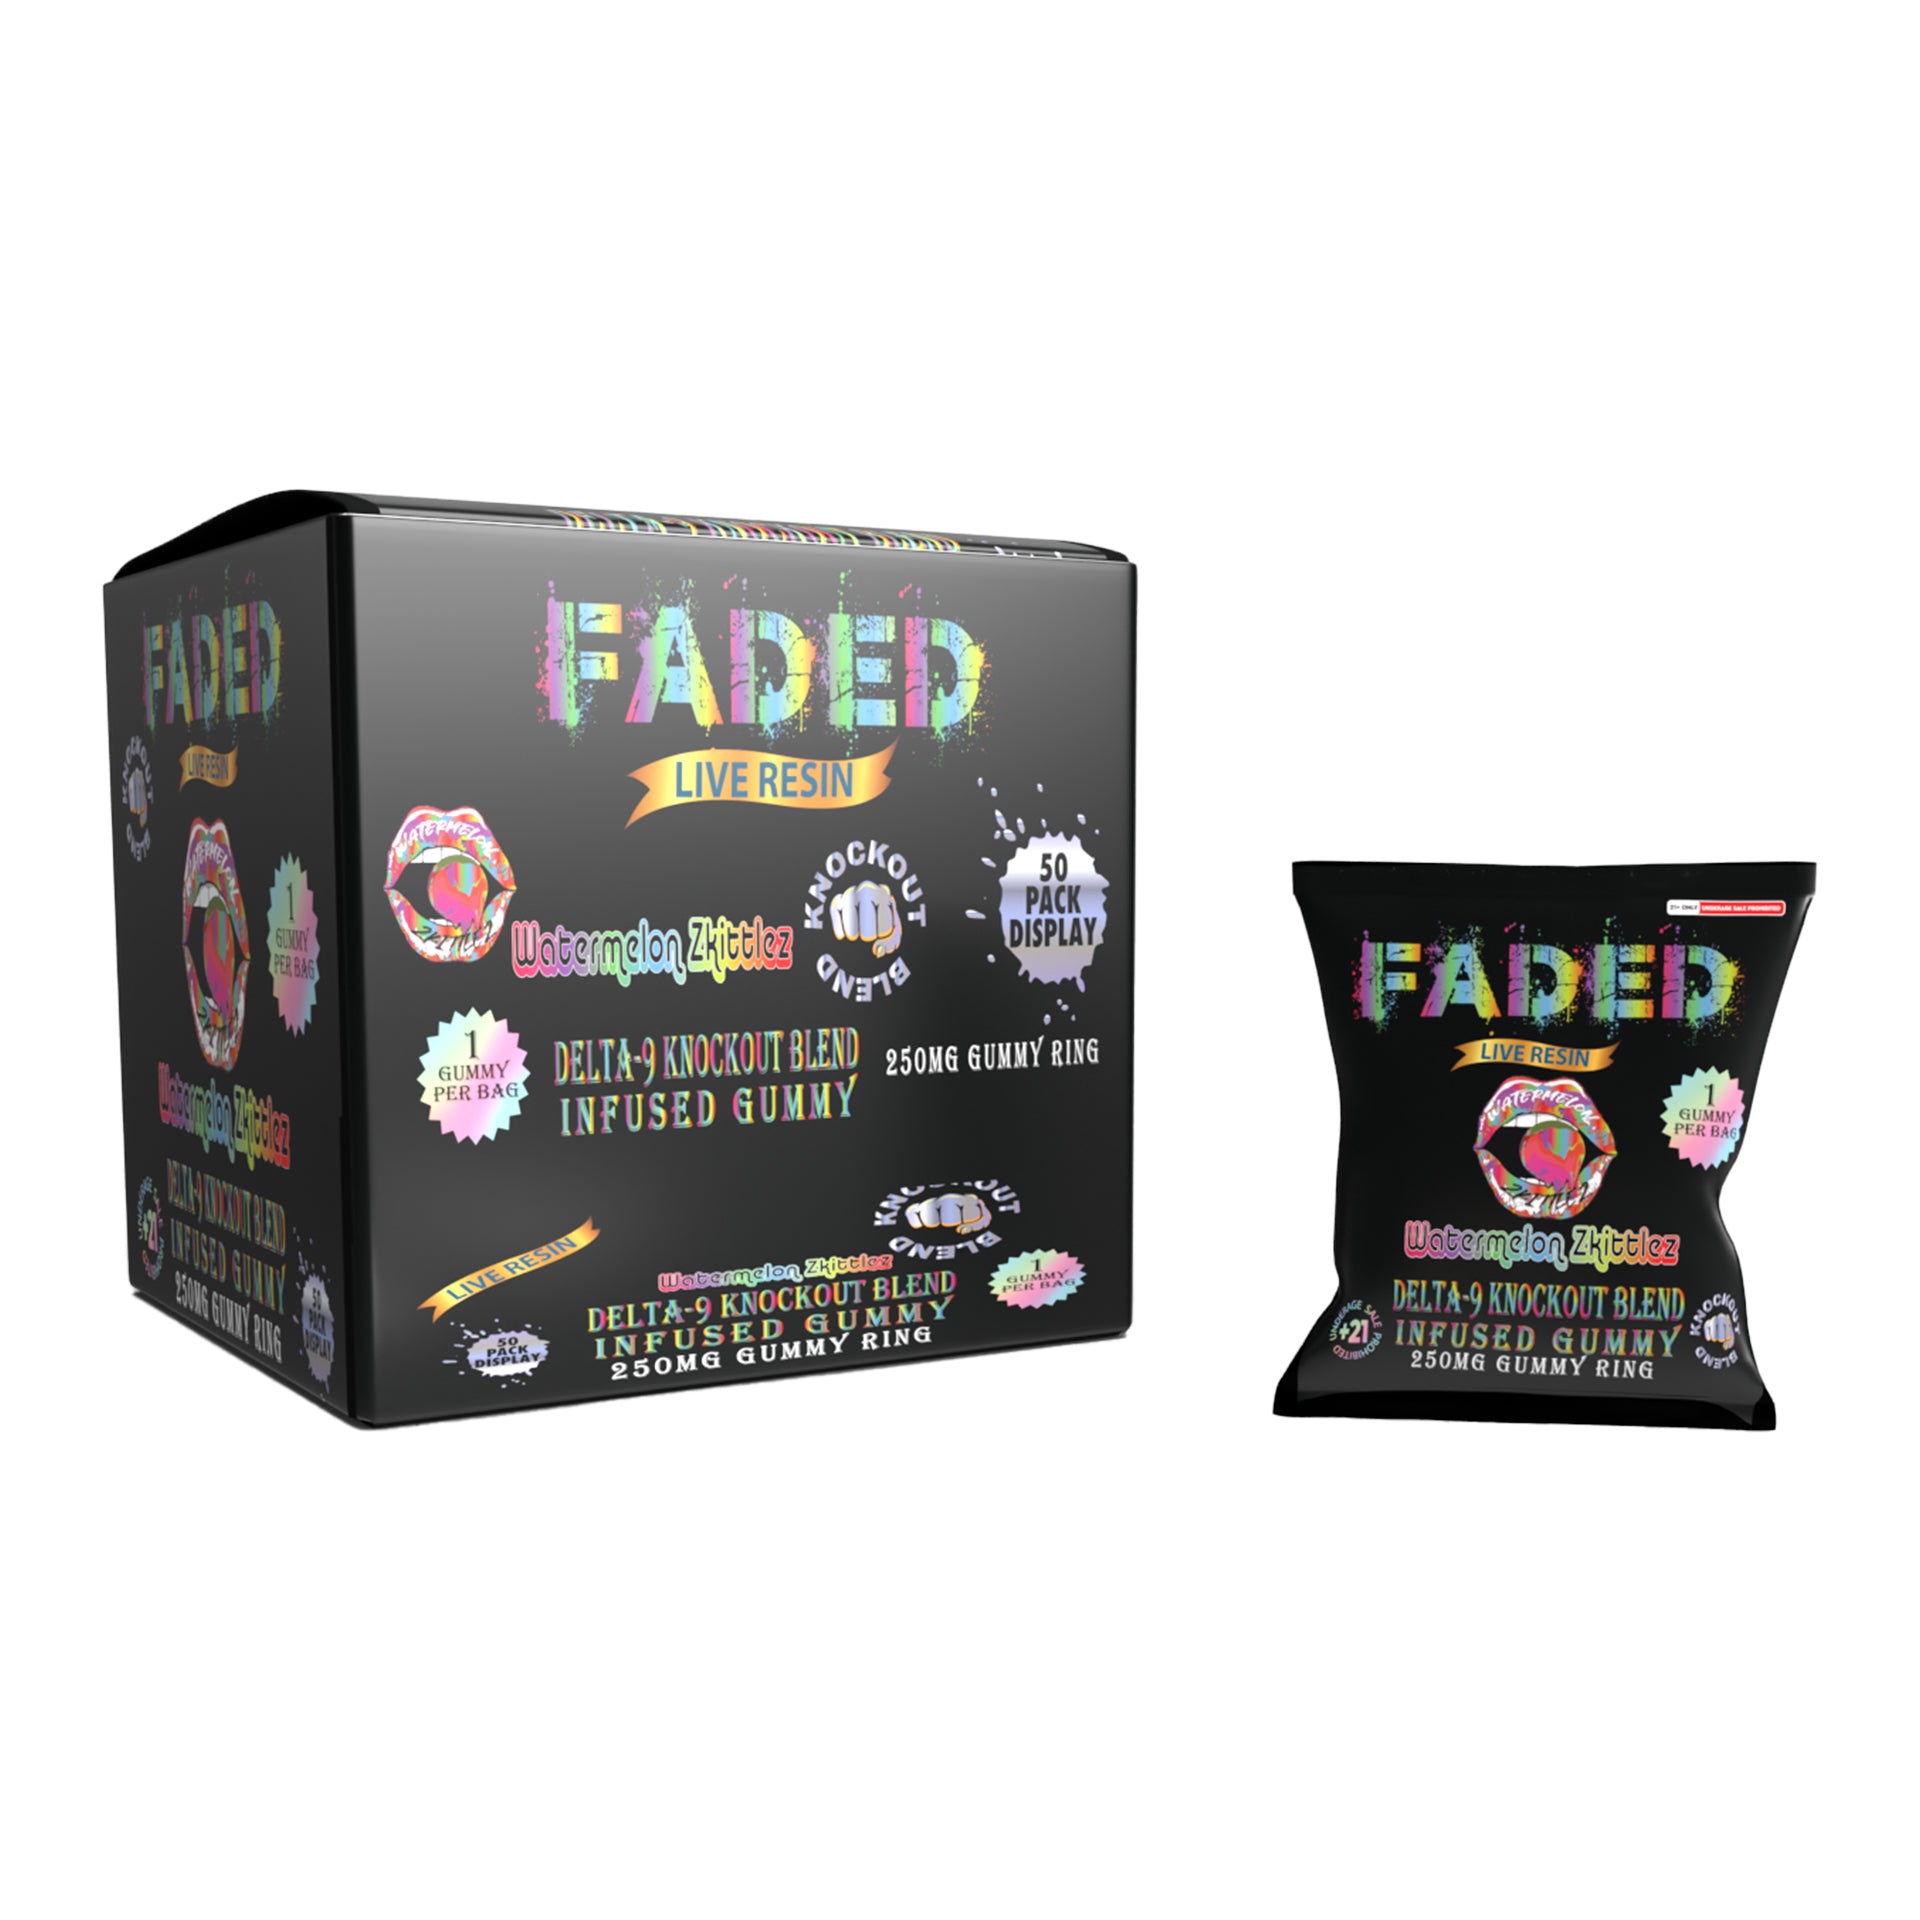 FADED DELTA - 9 KNOCKOUT BLEND WATERMELON ZKITTLEZ 1CT GUMMY RING 250MG